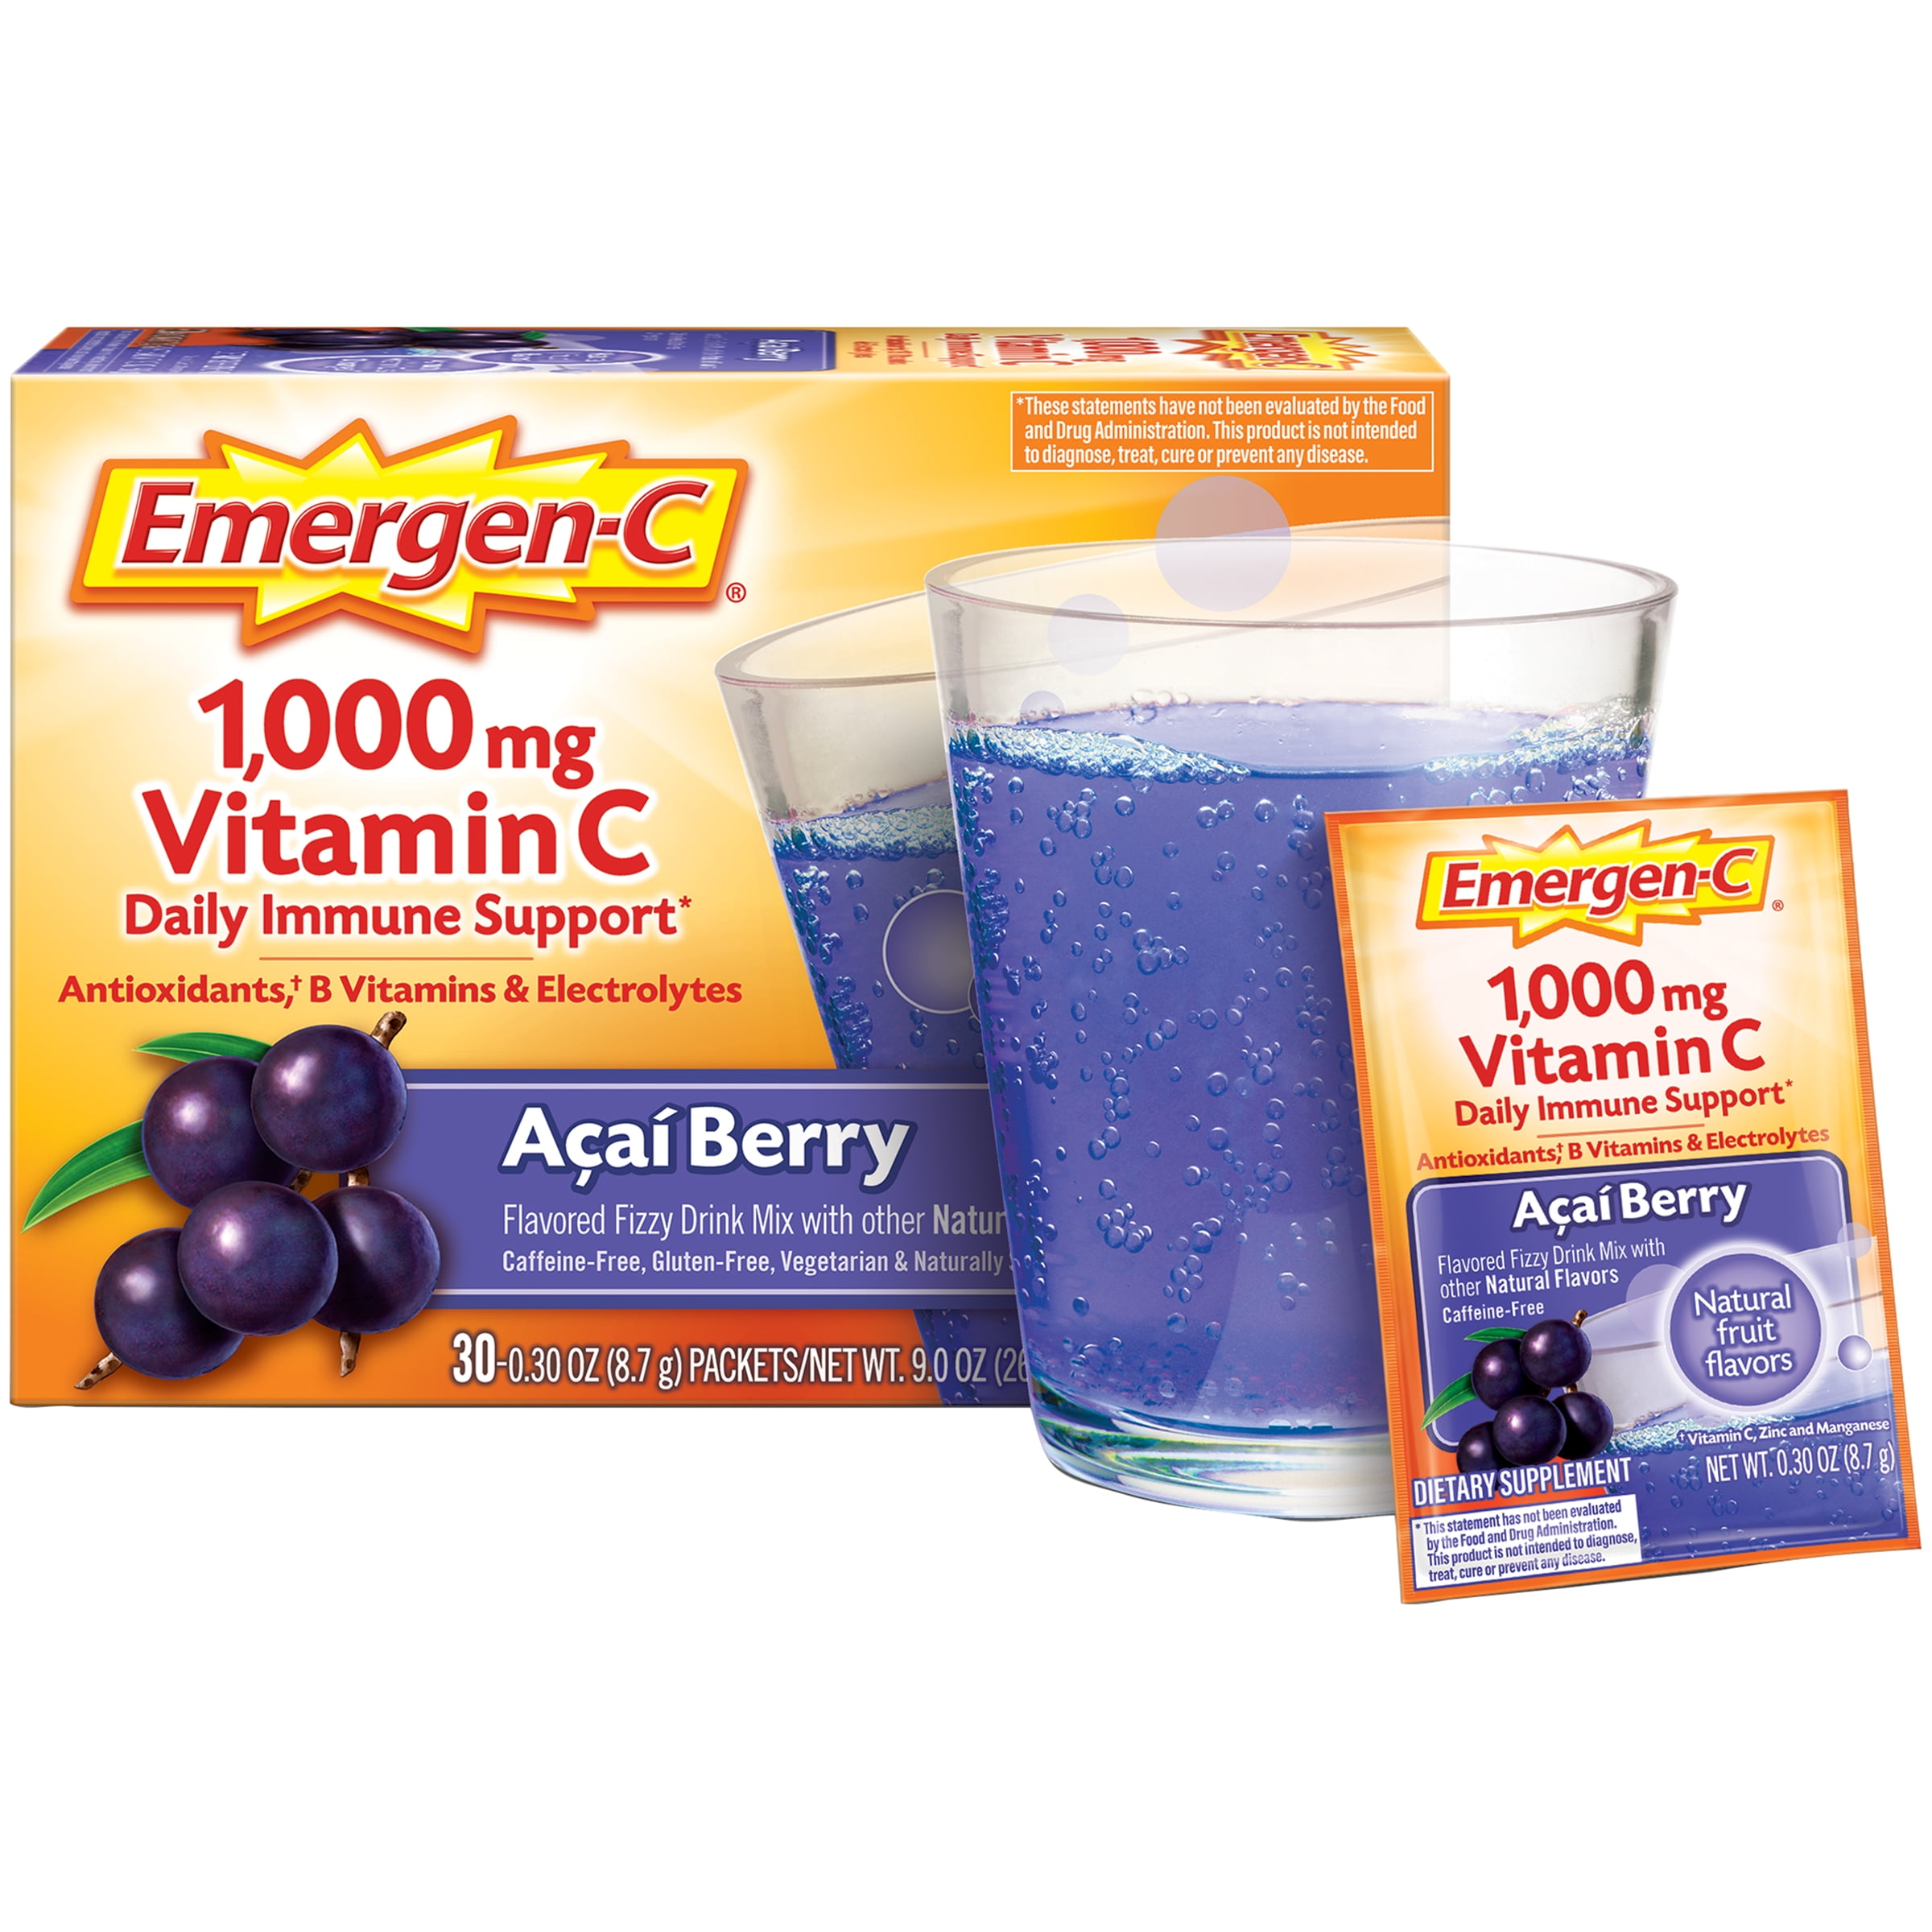 Emergen C 1000mg Vitamin C Powder With Antioxidants B Vitamins And Electrolytes For Immune Support Caffeine Free Vitamin C Supplement Fizzy Drink Mix Acai Berry Flavor 30 Count 1 Month Supply Walmart Com